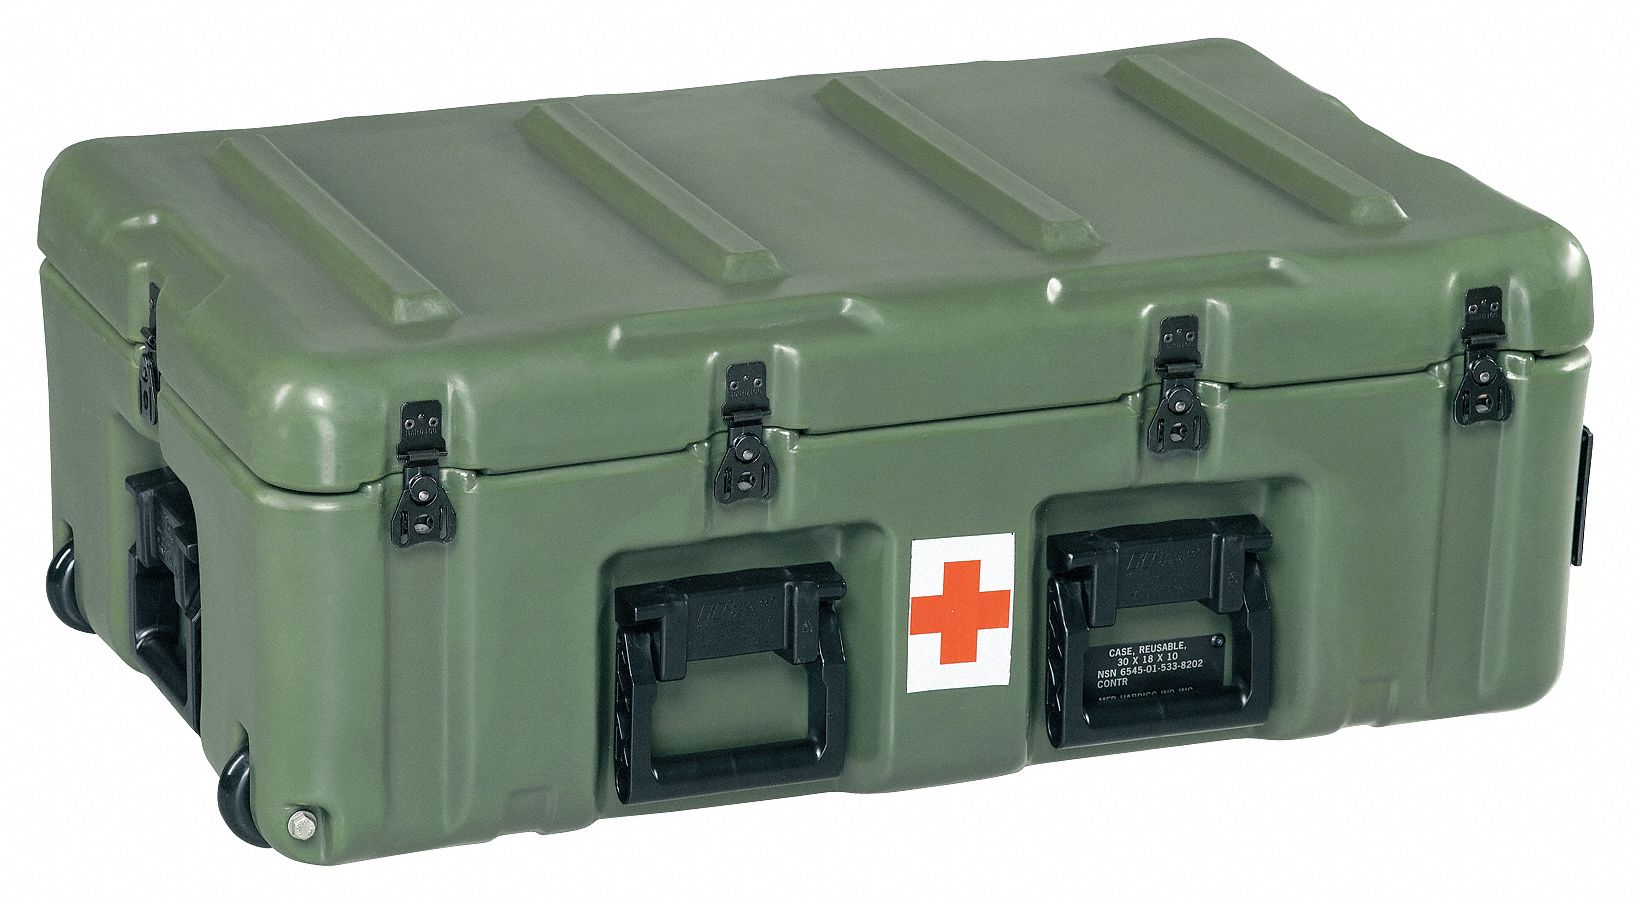 PELICAN Medical Chest: Medical Chest